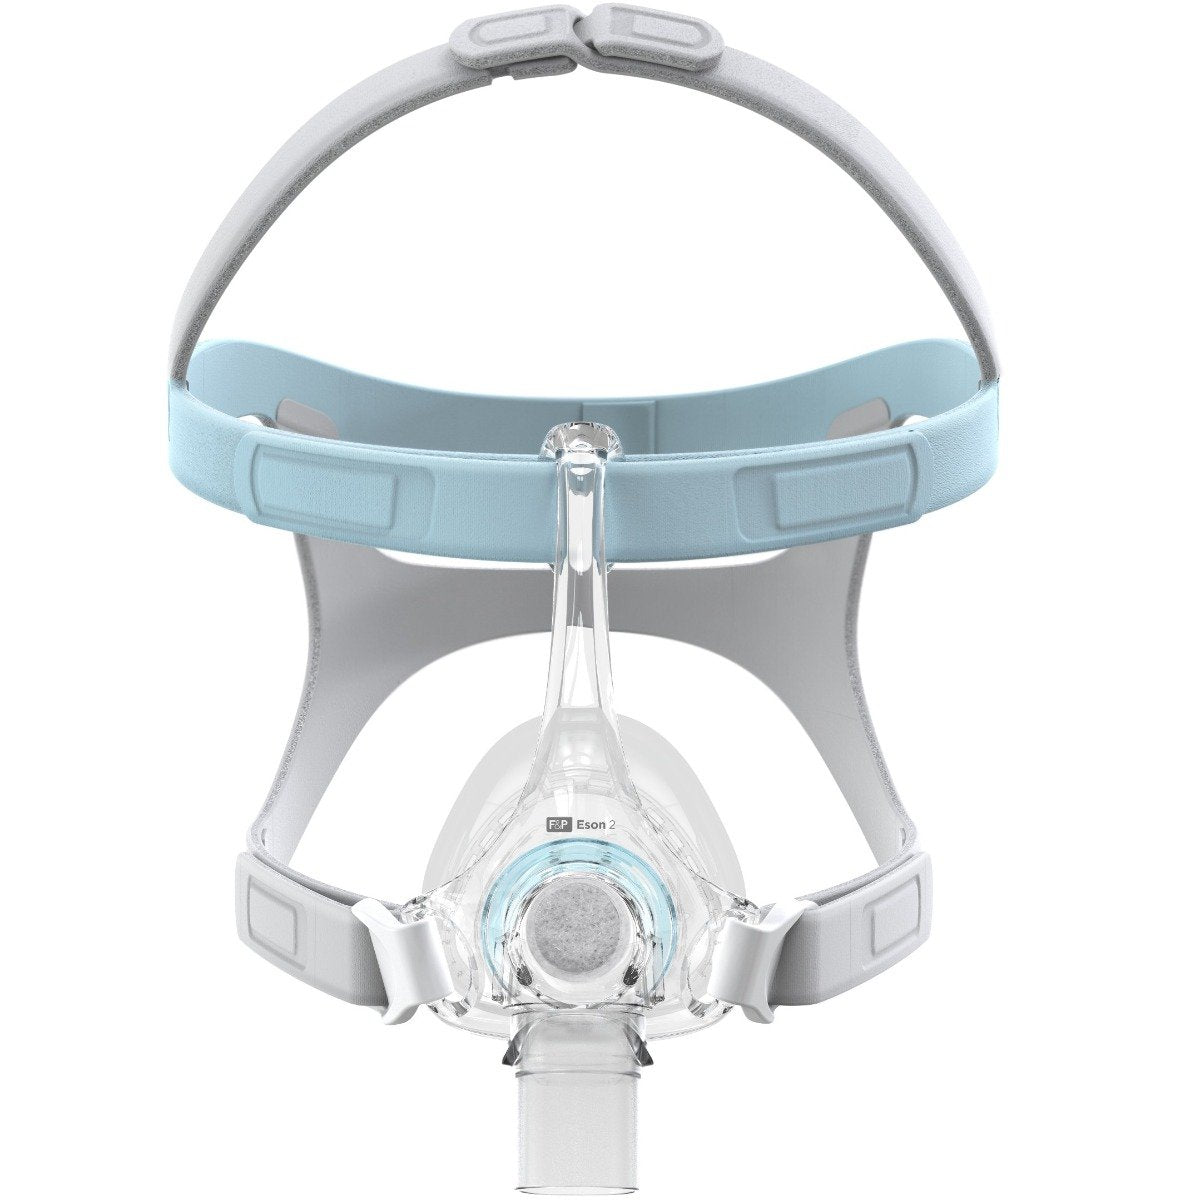 eson 2 cpap mask front view